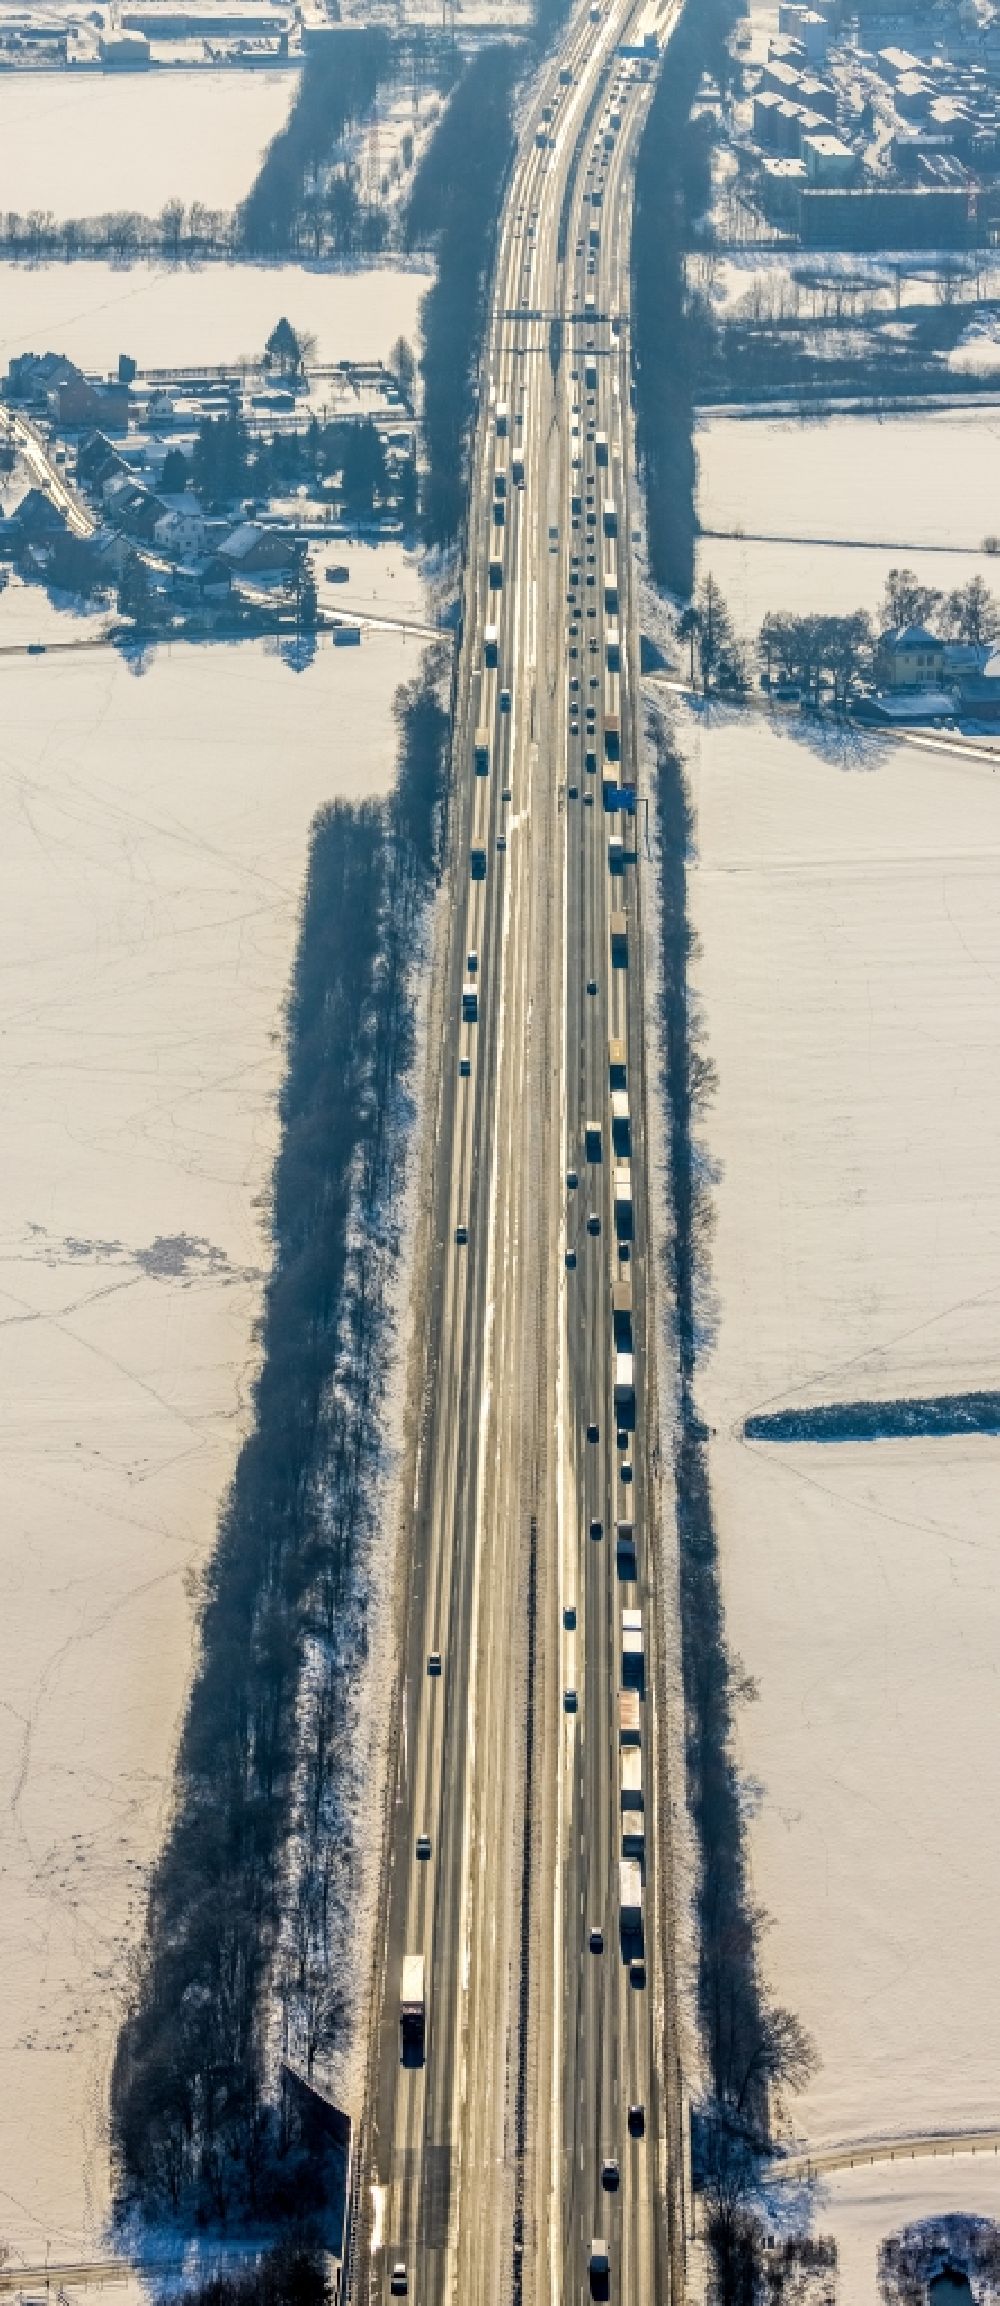 Unna from above - Wintry snowy highway route A1 in in Unna at Ruhrgebiet in the state North Rhine-Westphalia, Germany